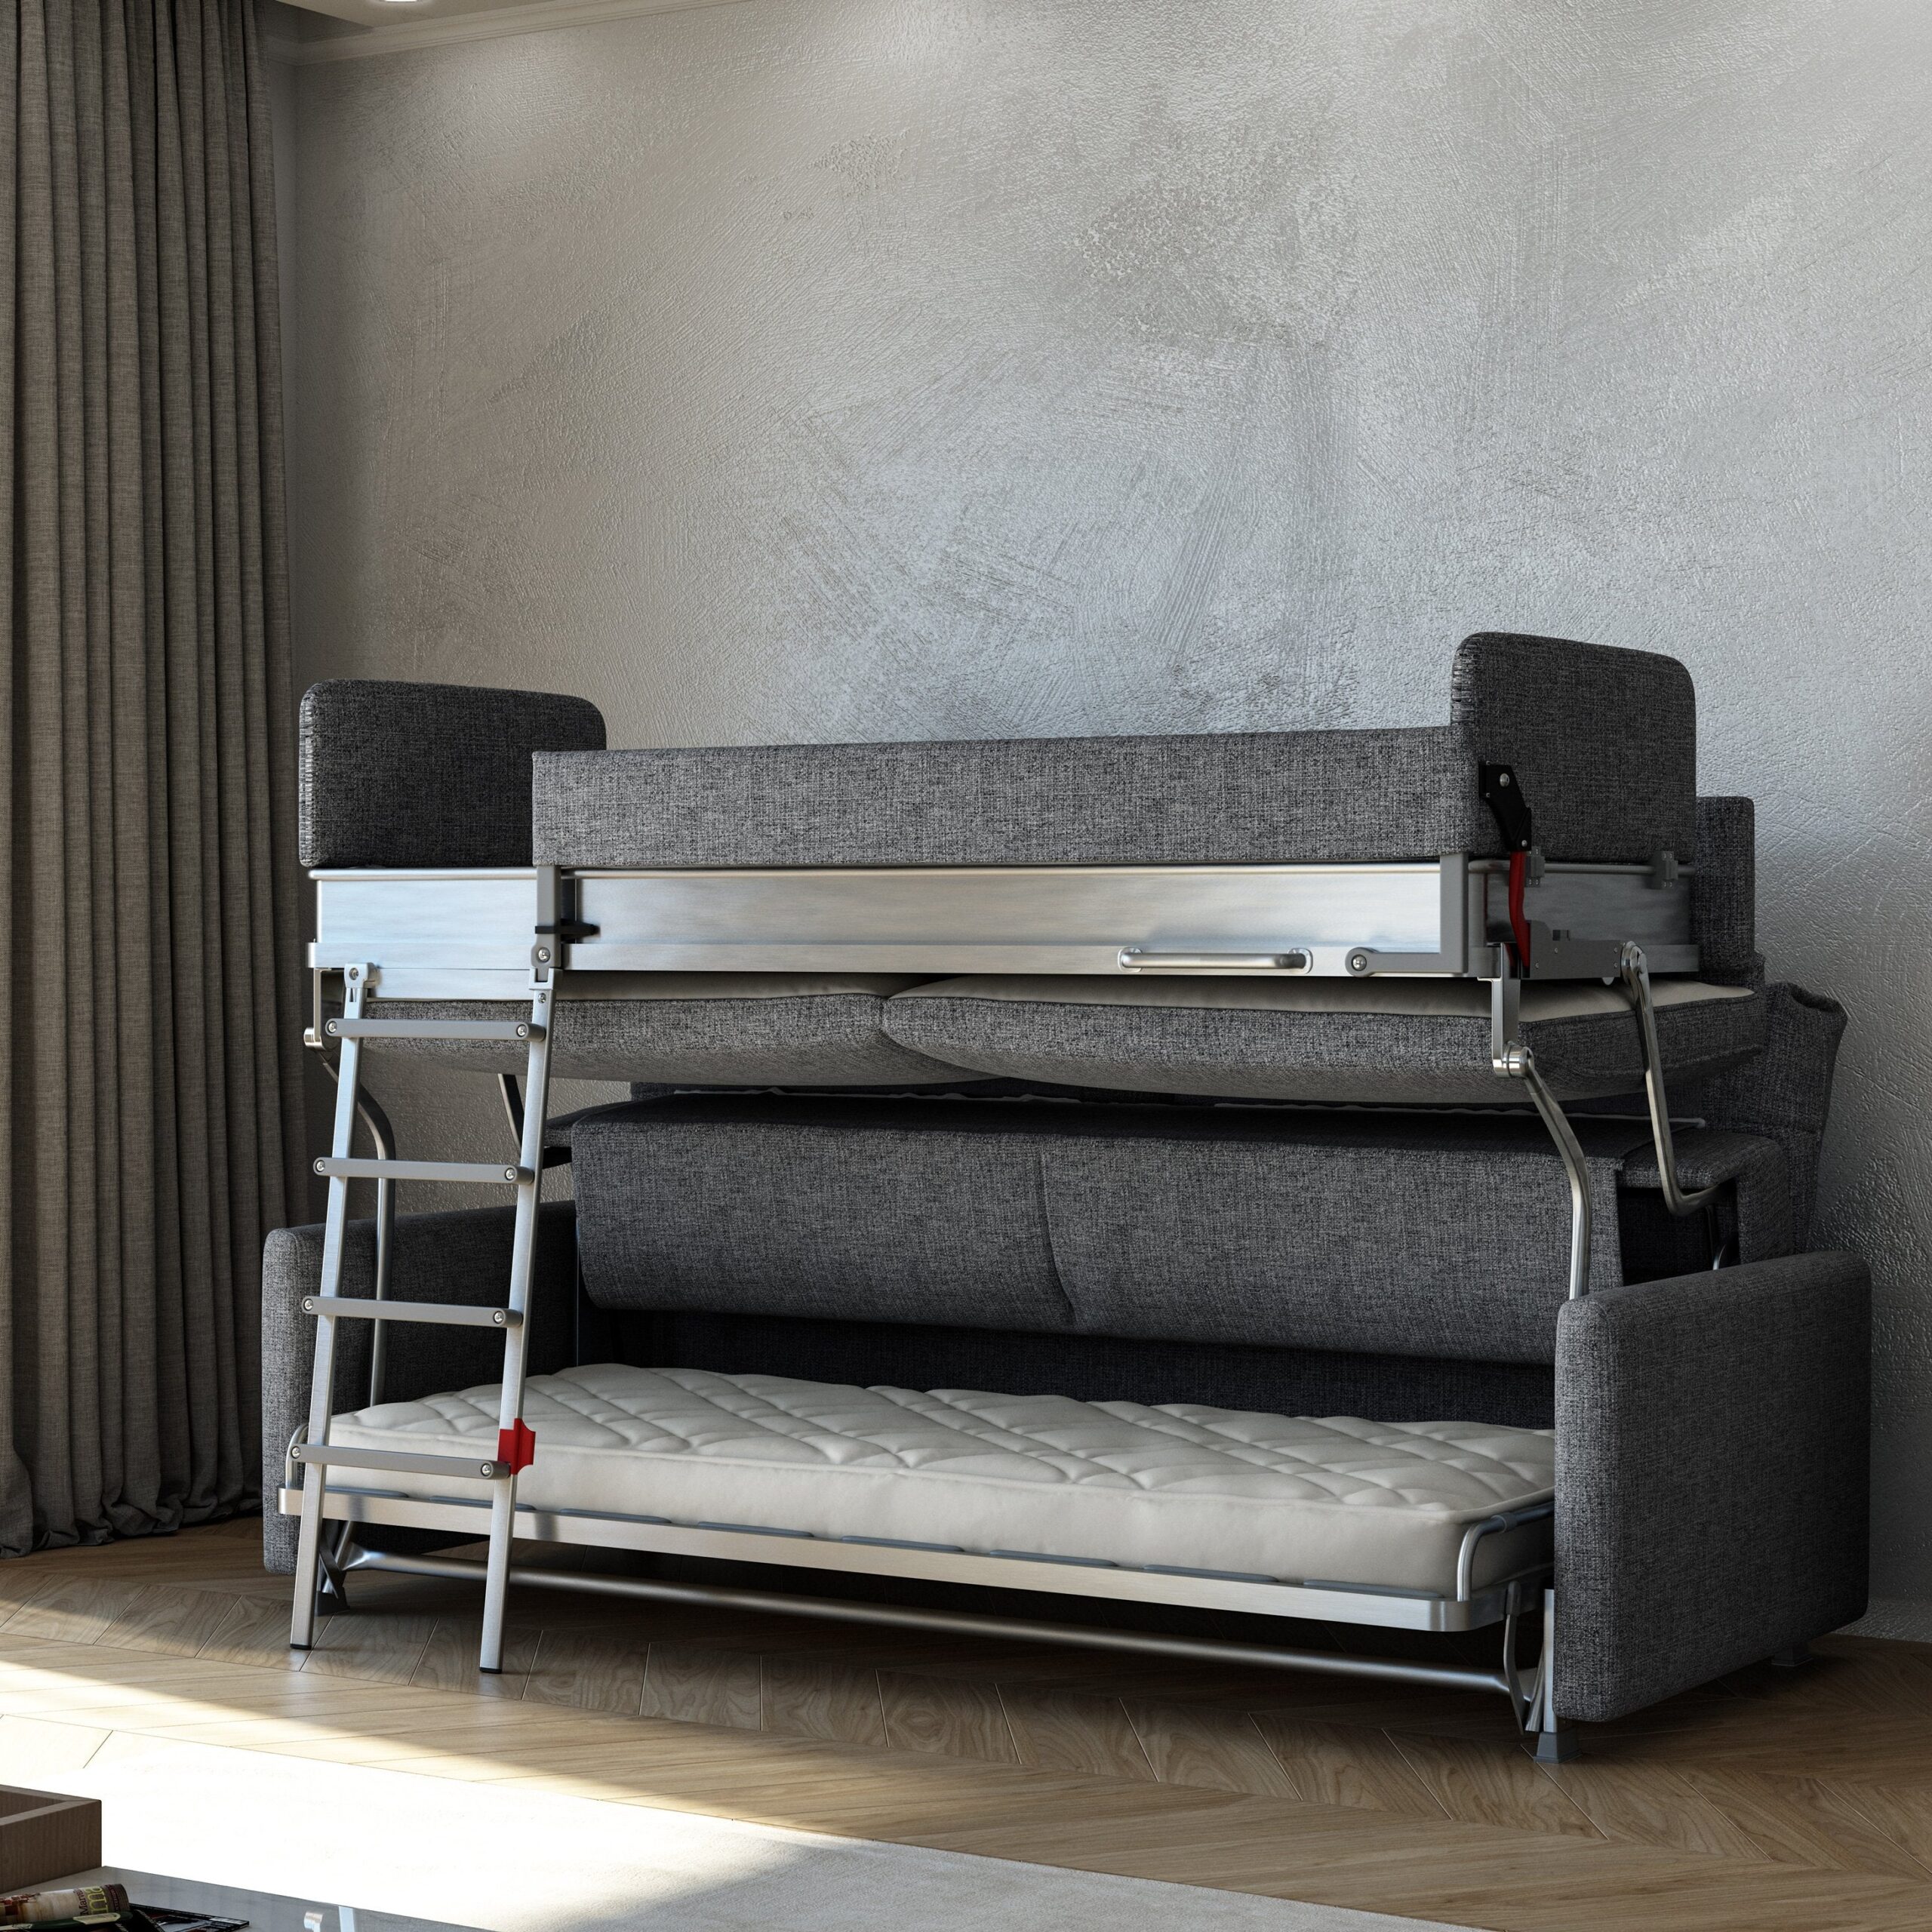 Modern bunk bed couch for higher functionality